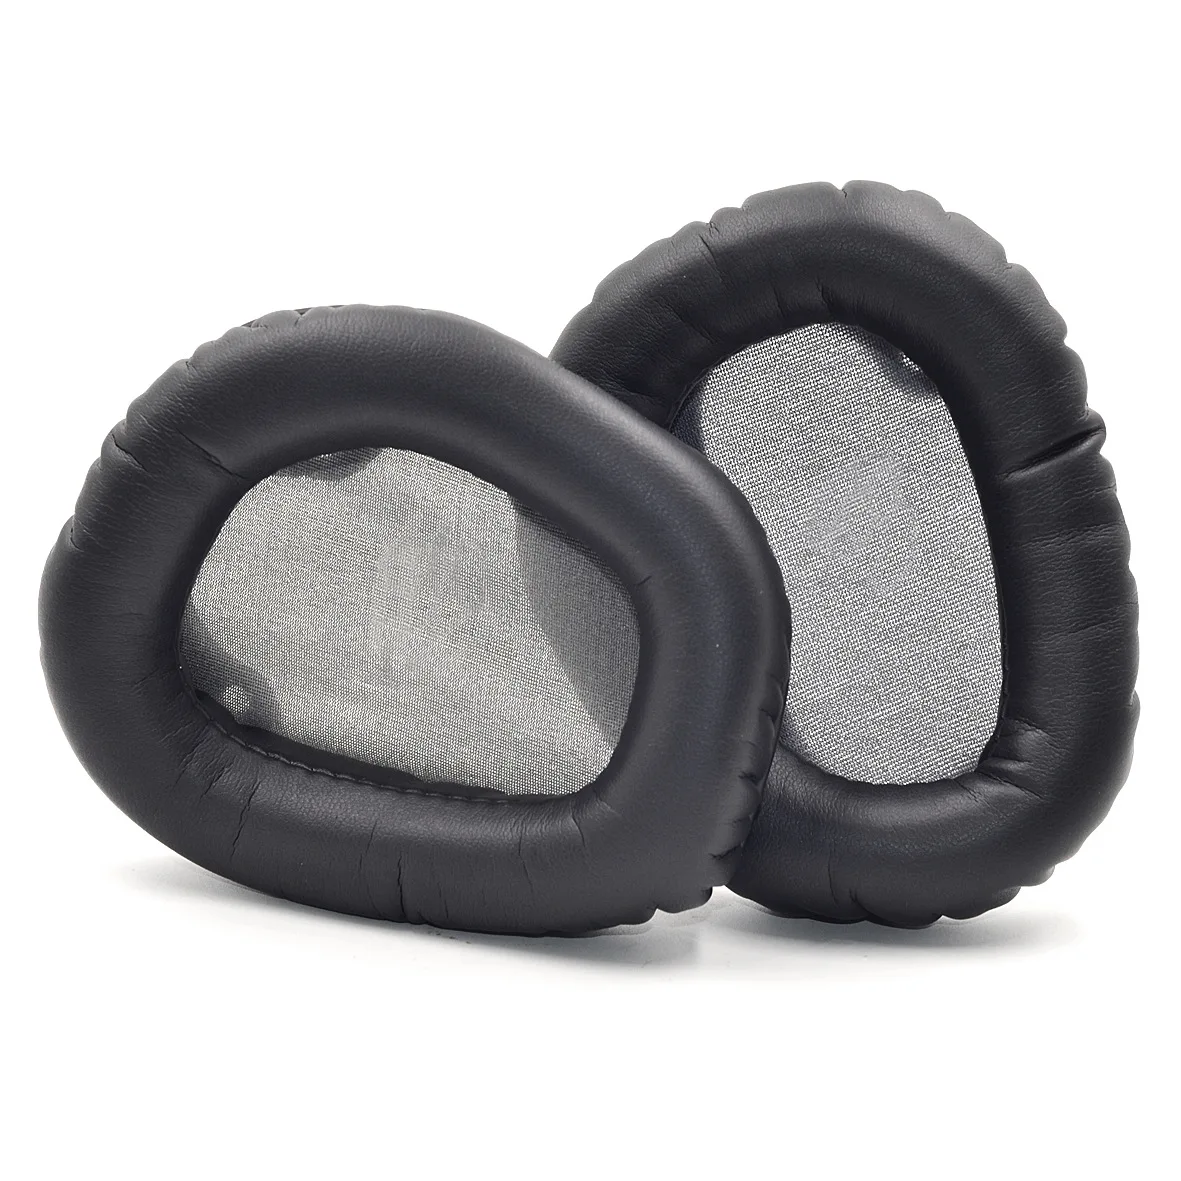 

XQ High Quality Soft Replacement Earpads Cushion Cover for ASUS ROG Centurion True 7.1 Headset Soft Protein Skin Ear Pads